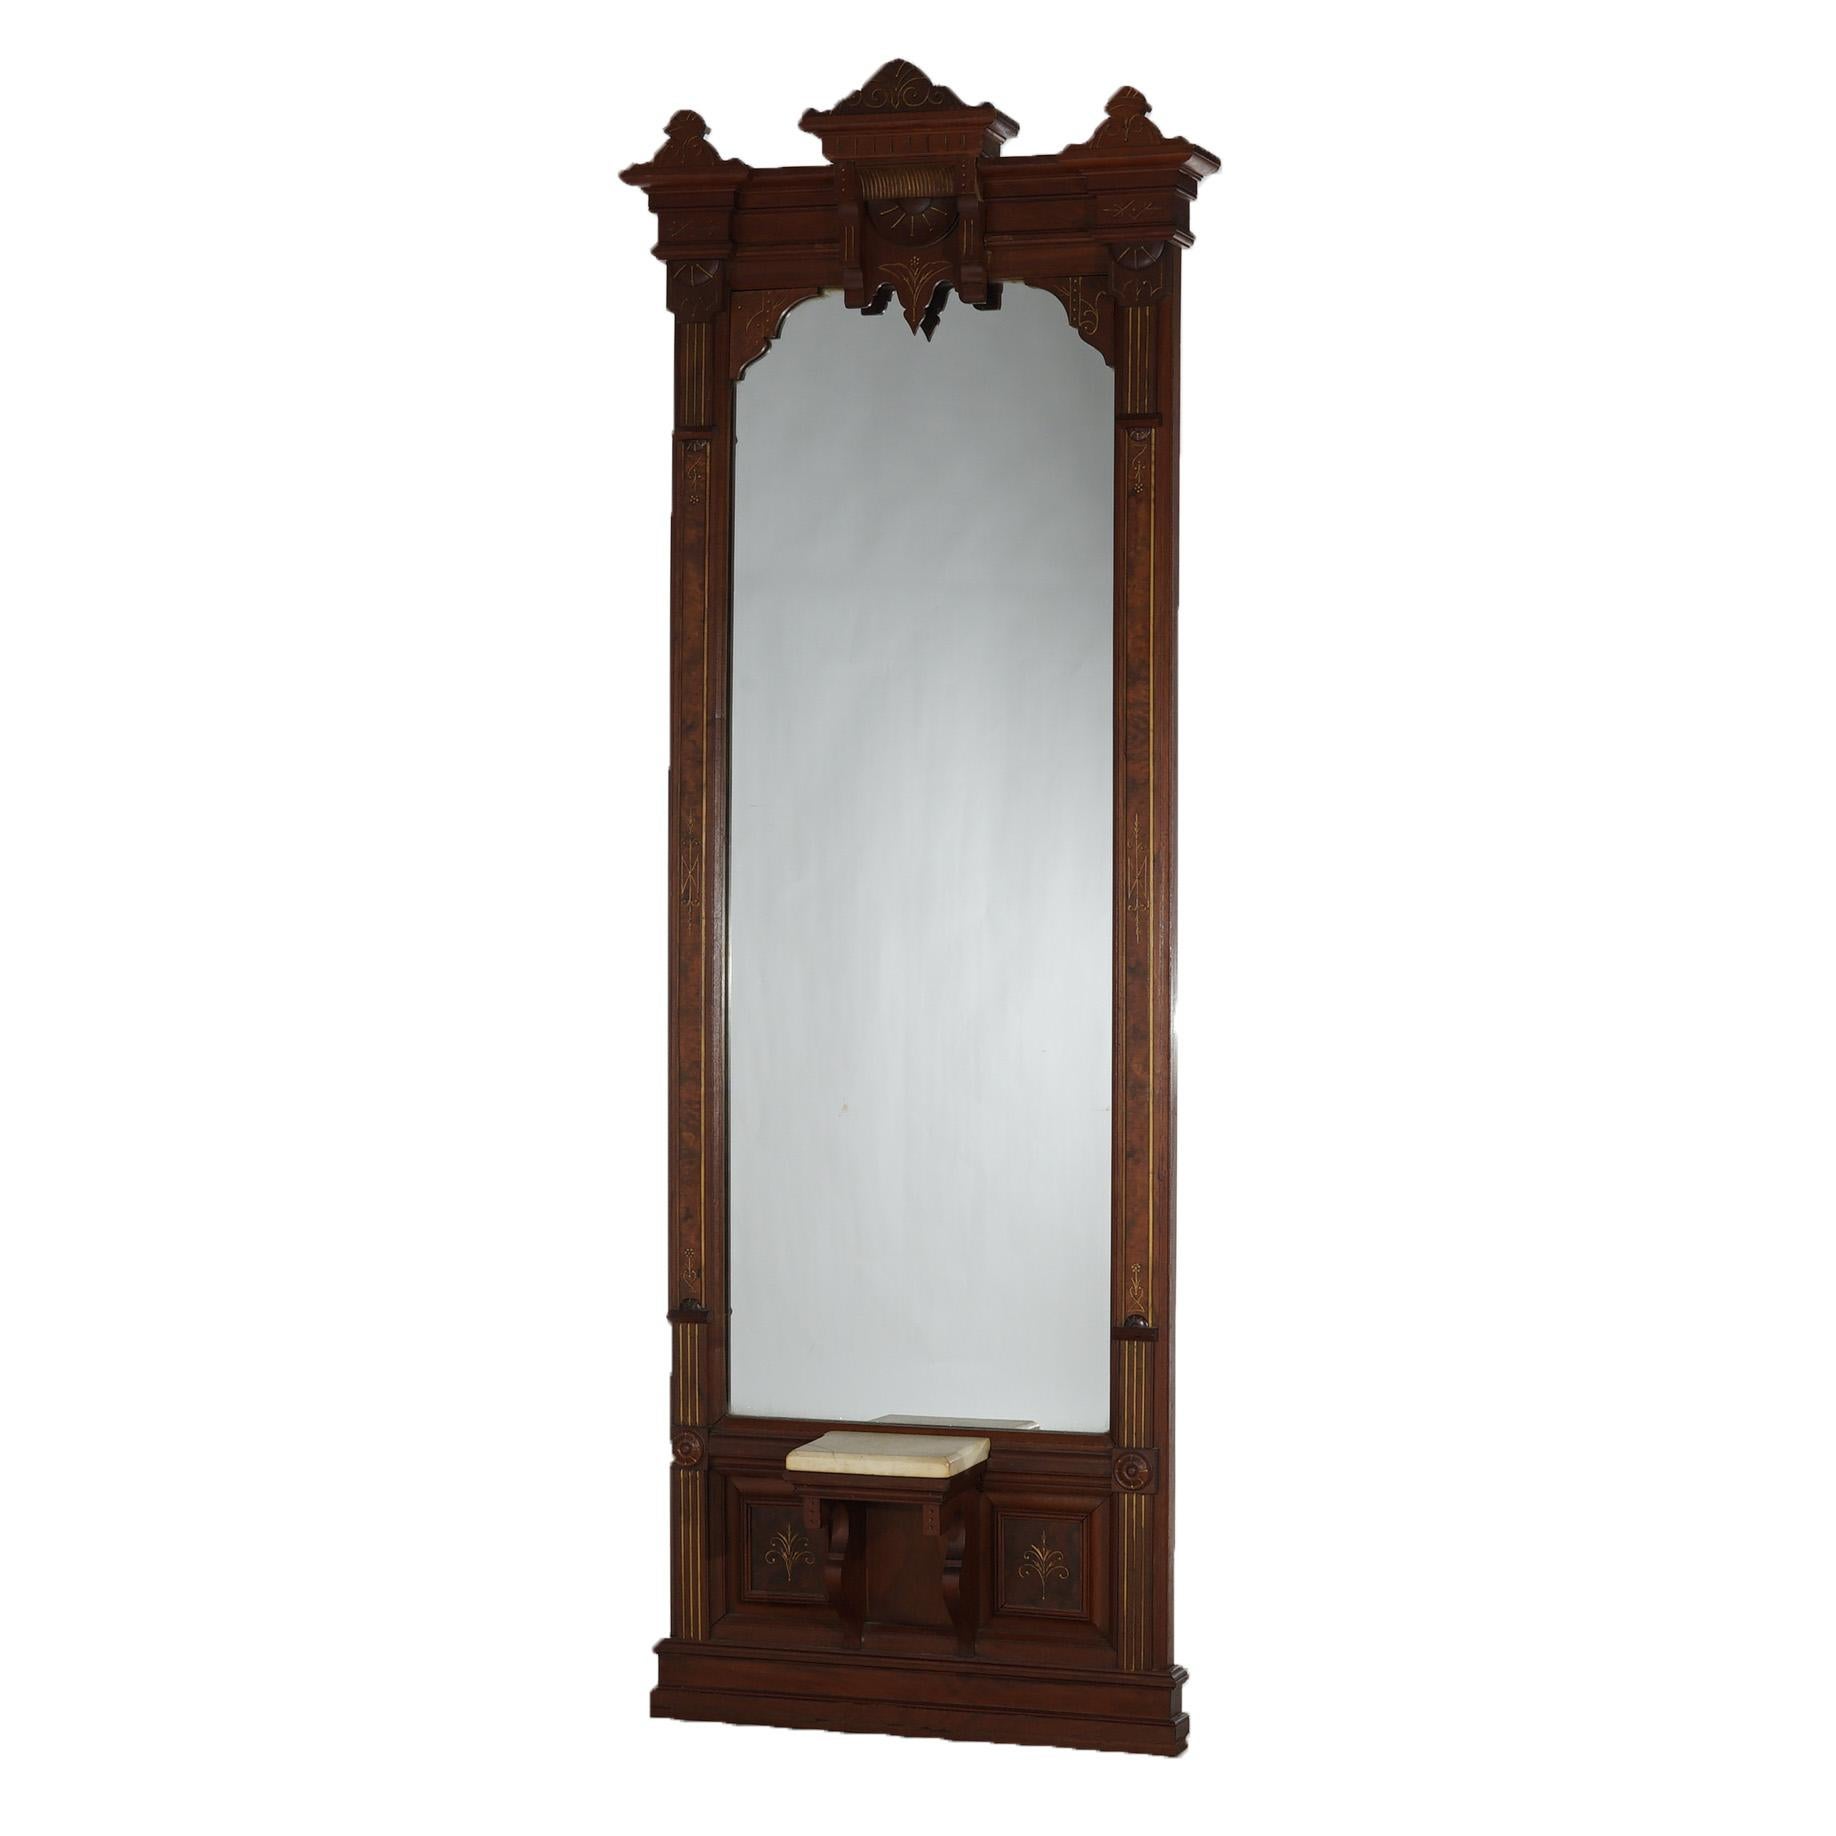 ***Ask About Reduced In-House Shipping Rates - Reliable Service & Fully Insured***

Antique Renaissance Revival pier mirror offers walnut and burl construction with gilt incised decoration and marble tray, c1880

Measures - 96